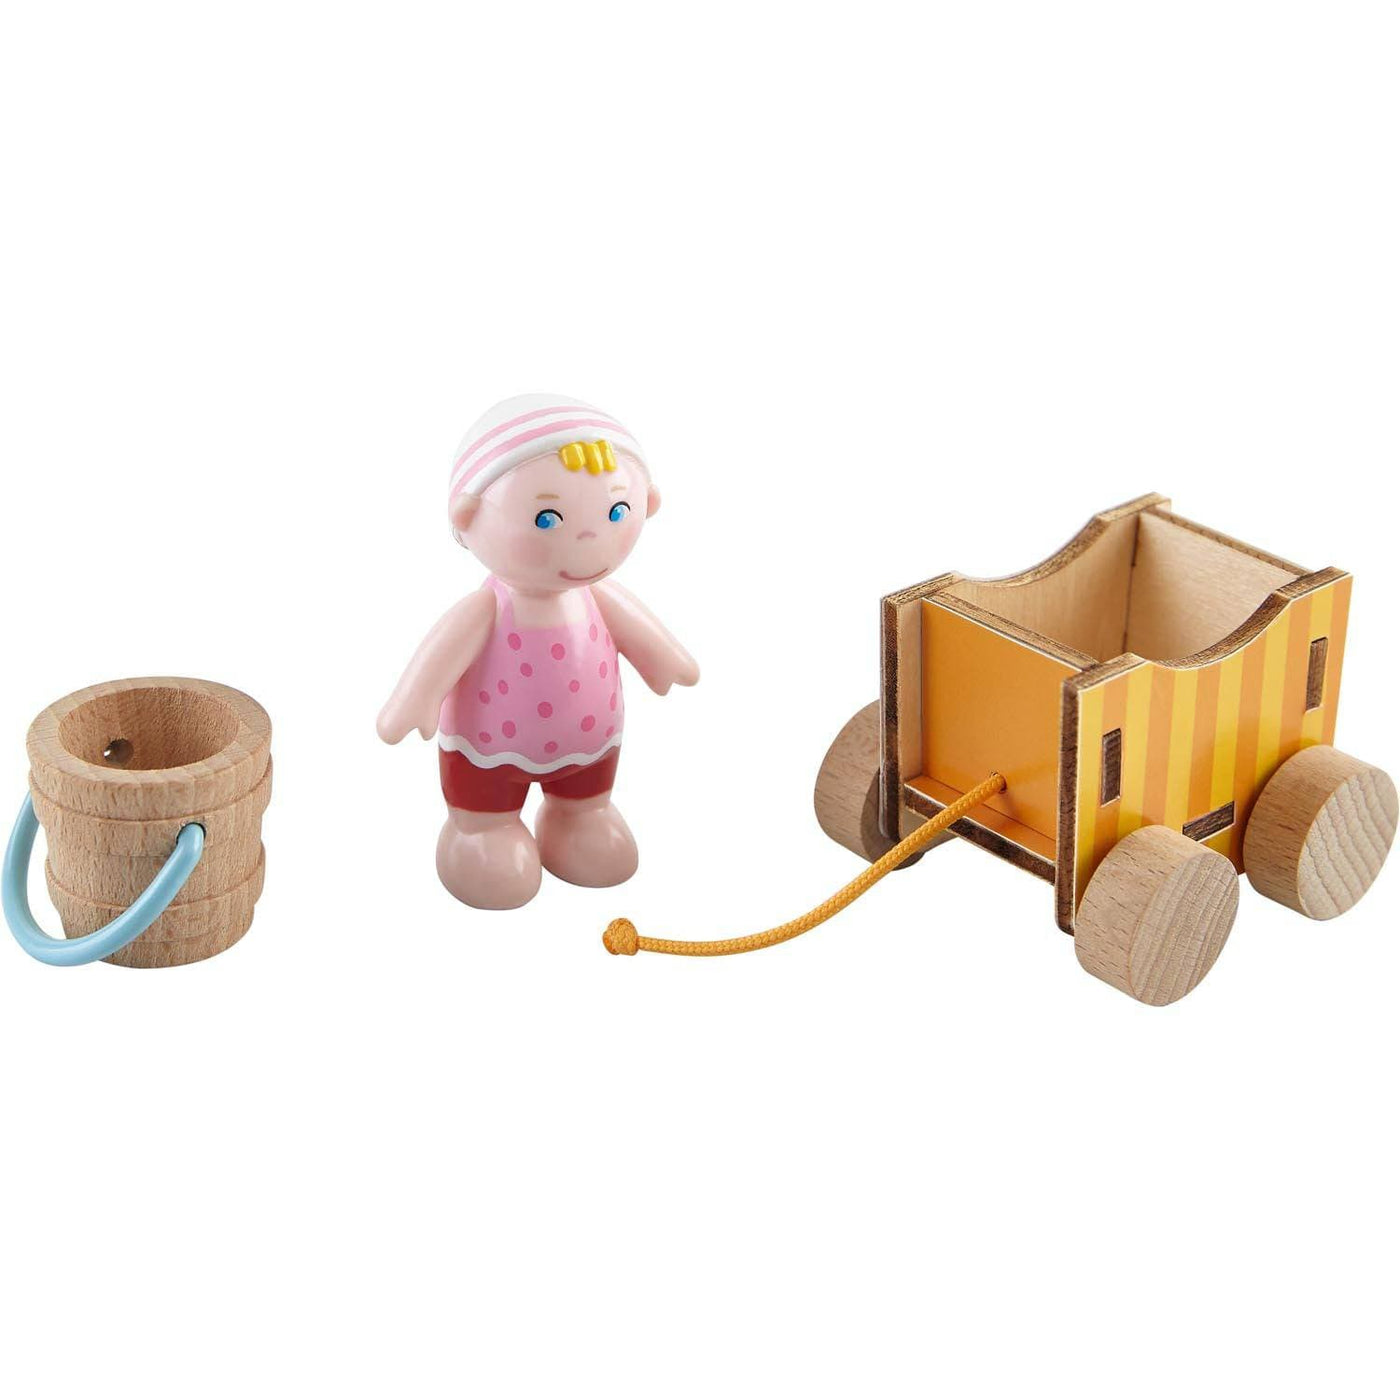 Little Friends Baby Nora Doll with Wagon & Pail - HABA USA